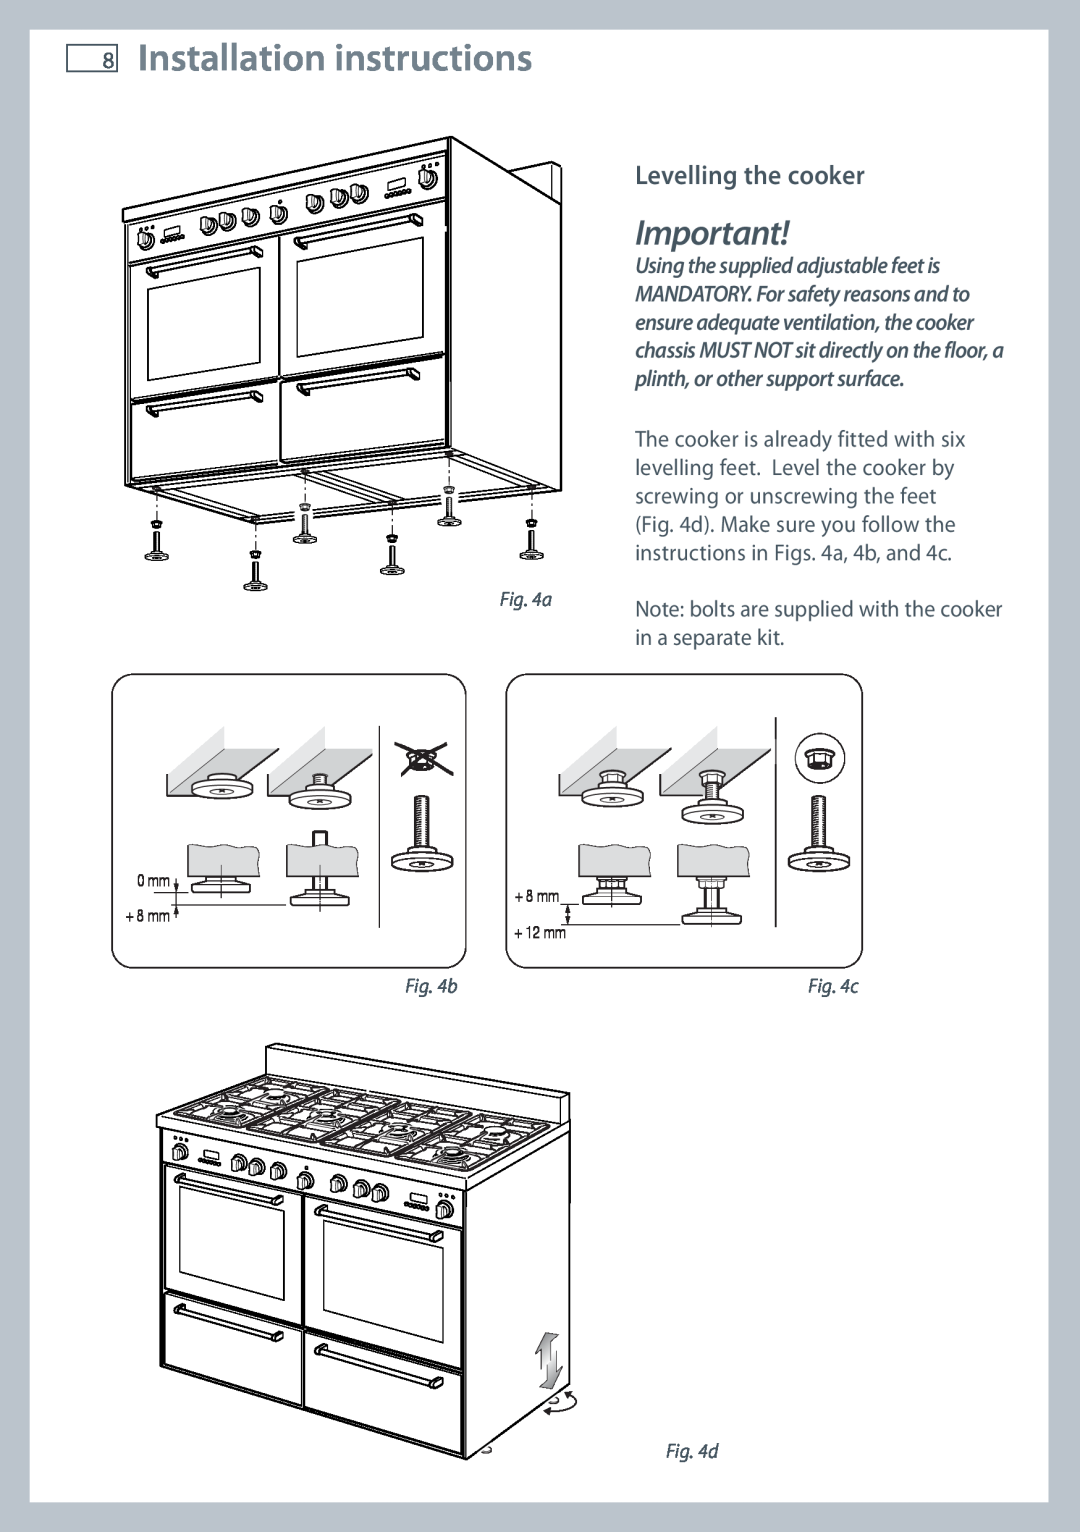 Fisher & Paykel OR120 Installation instructions, Levelling the cooker, b, d, 0 mm + 8 mm + 8 mm + 12 mm 